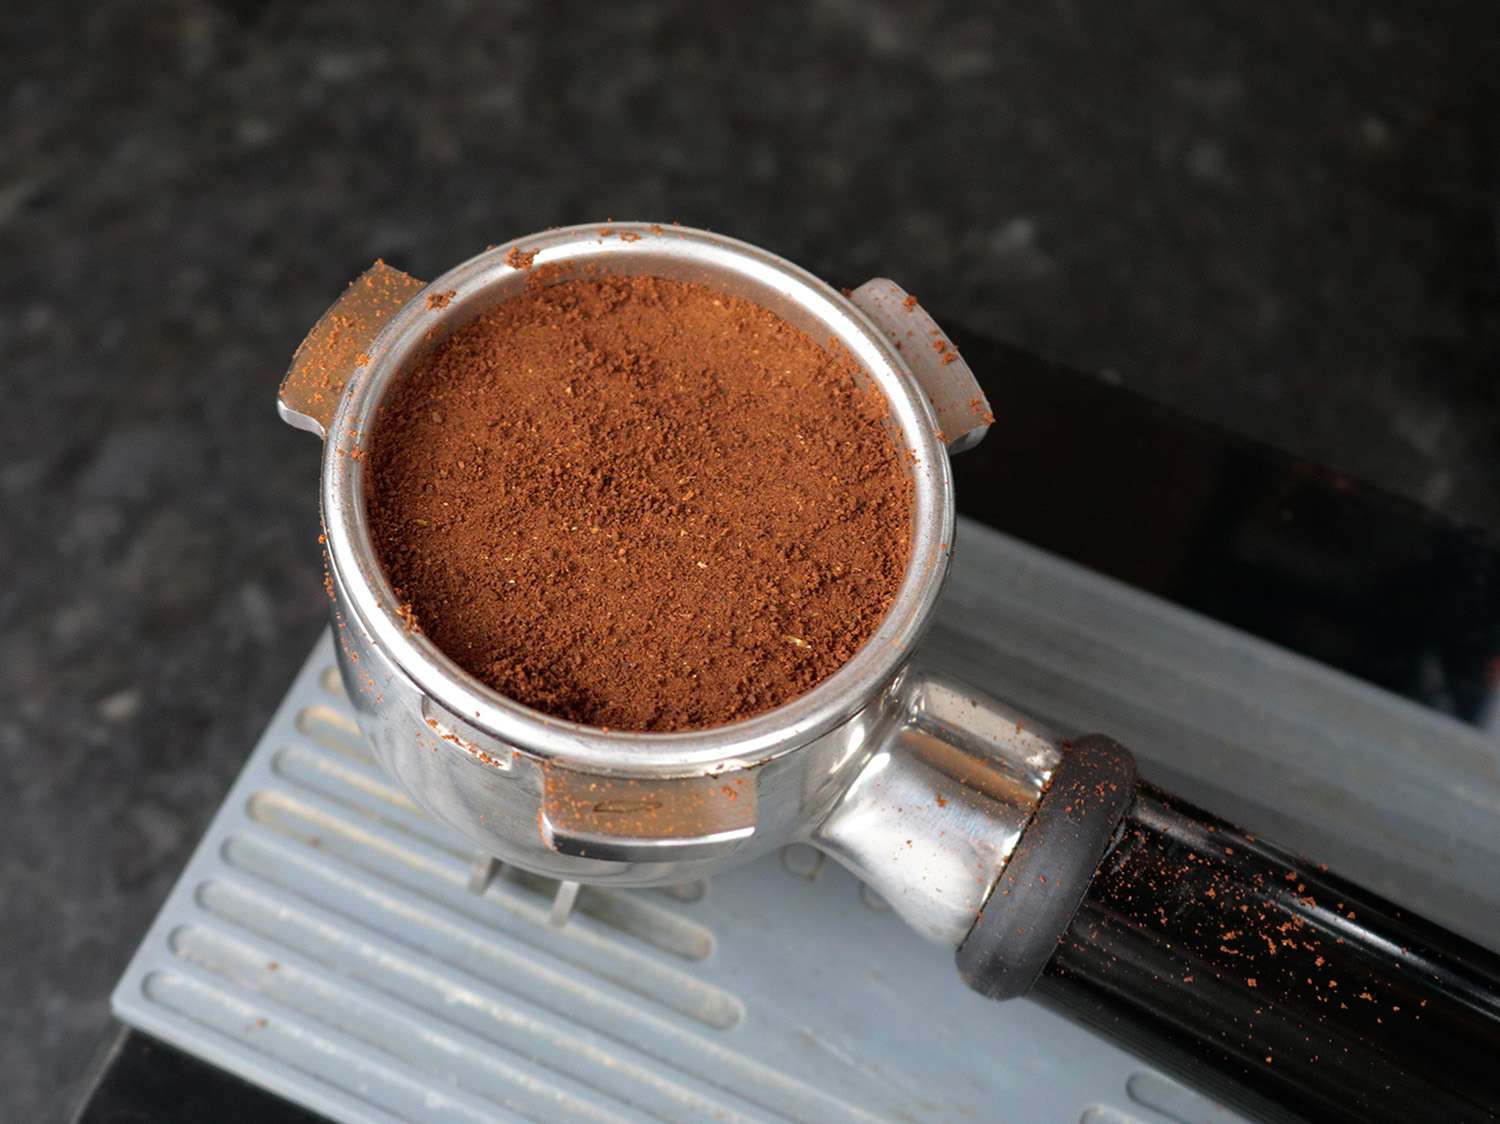 a tamped puck of coffee in a portafilter basket